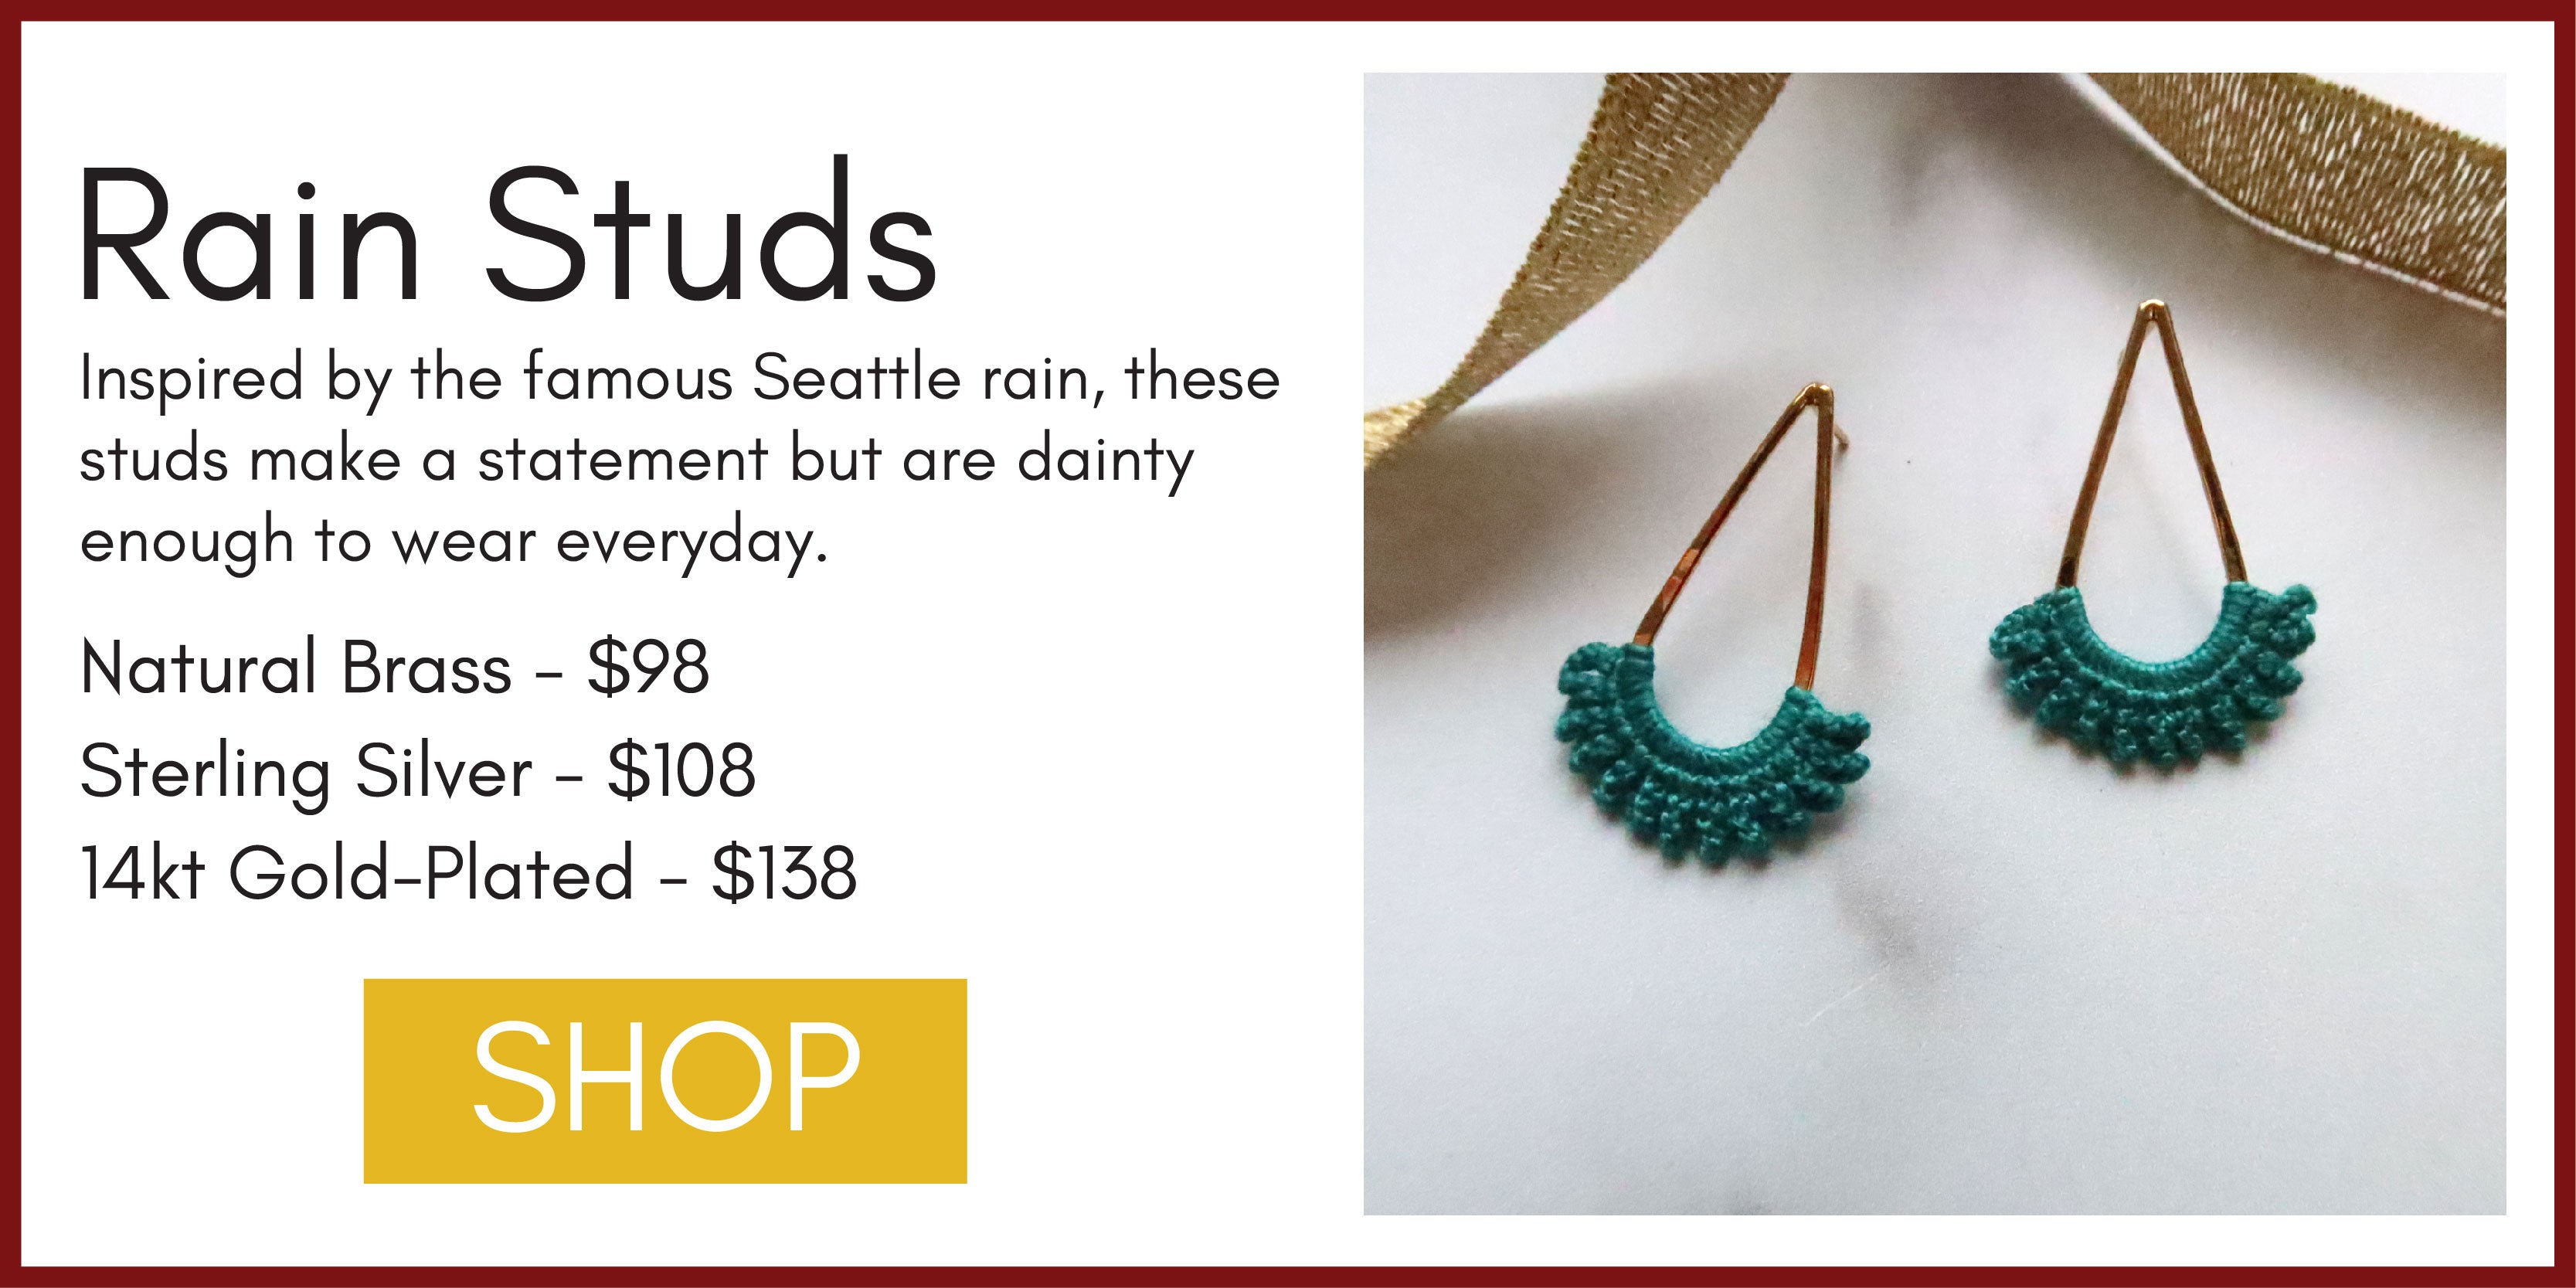 Graphic with title "Rain Studs" and an image that shows the Rain Studs in Turquoise with a gold ribbon in the background